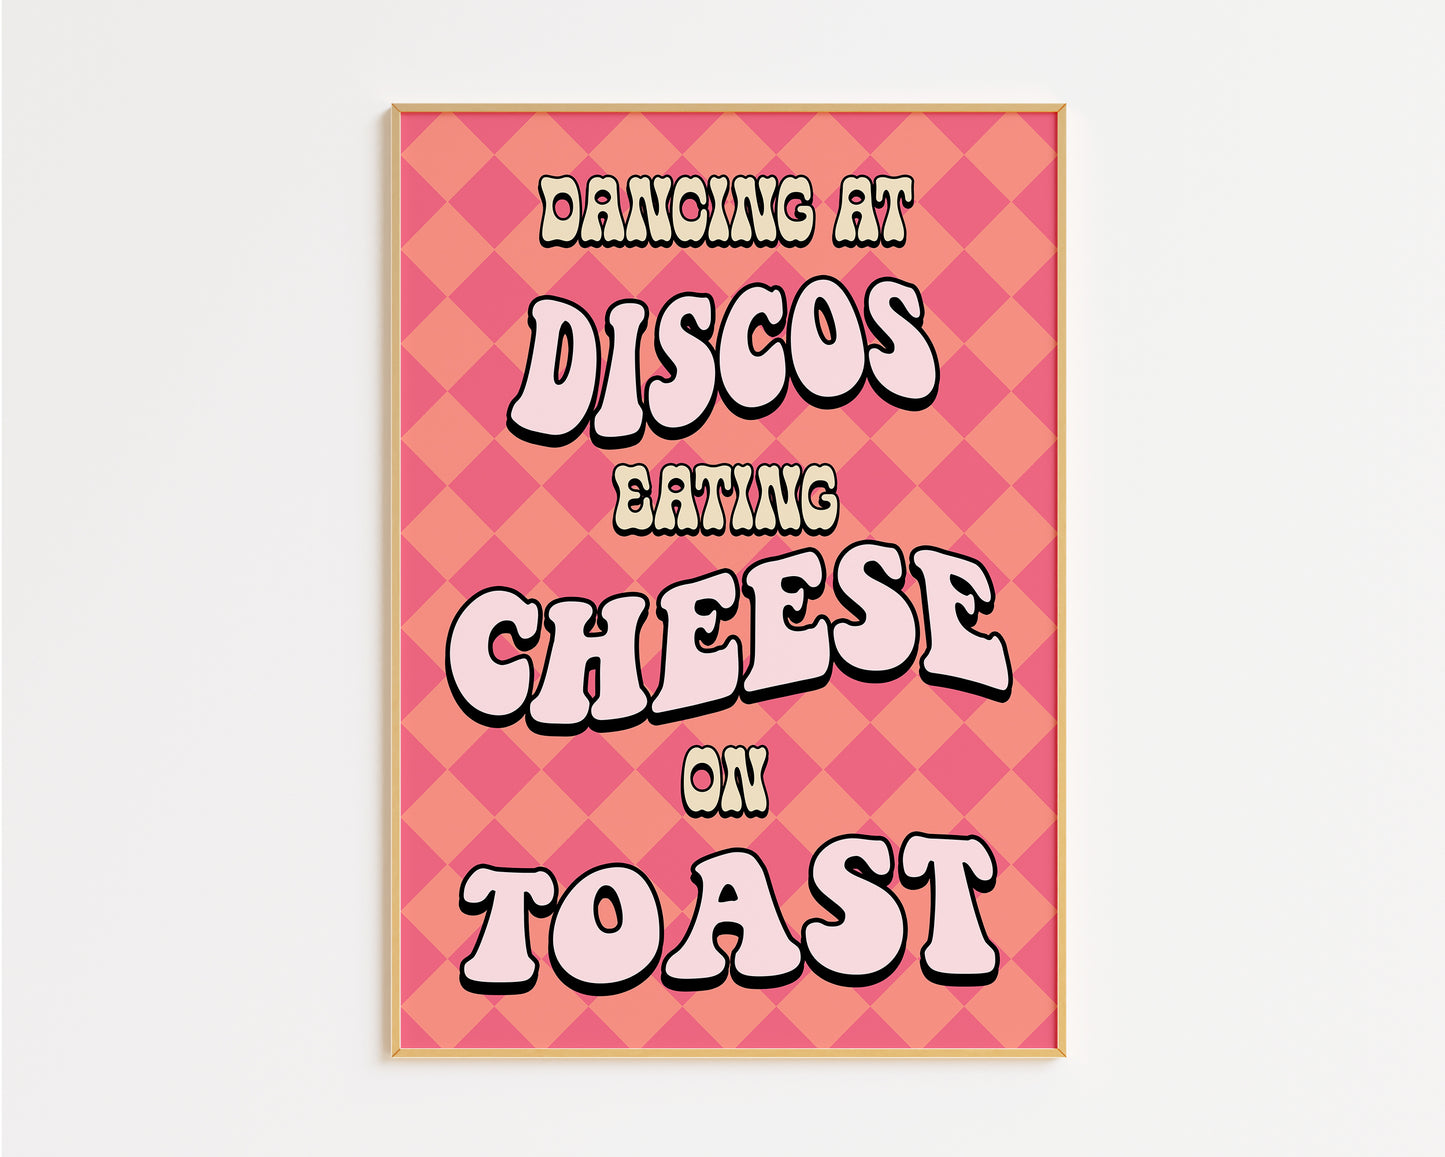 Dancing At Discos Eating Cheese On Toast Print